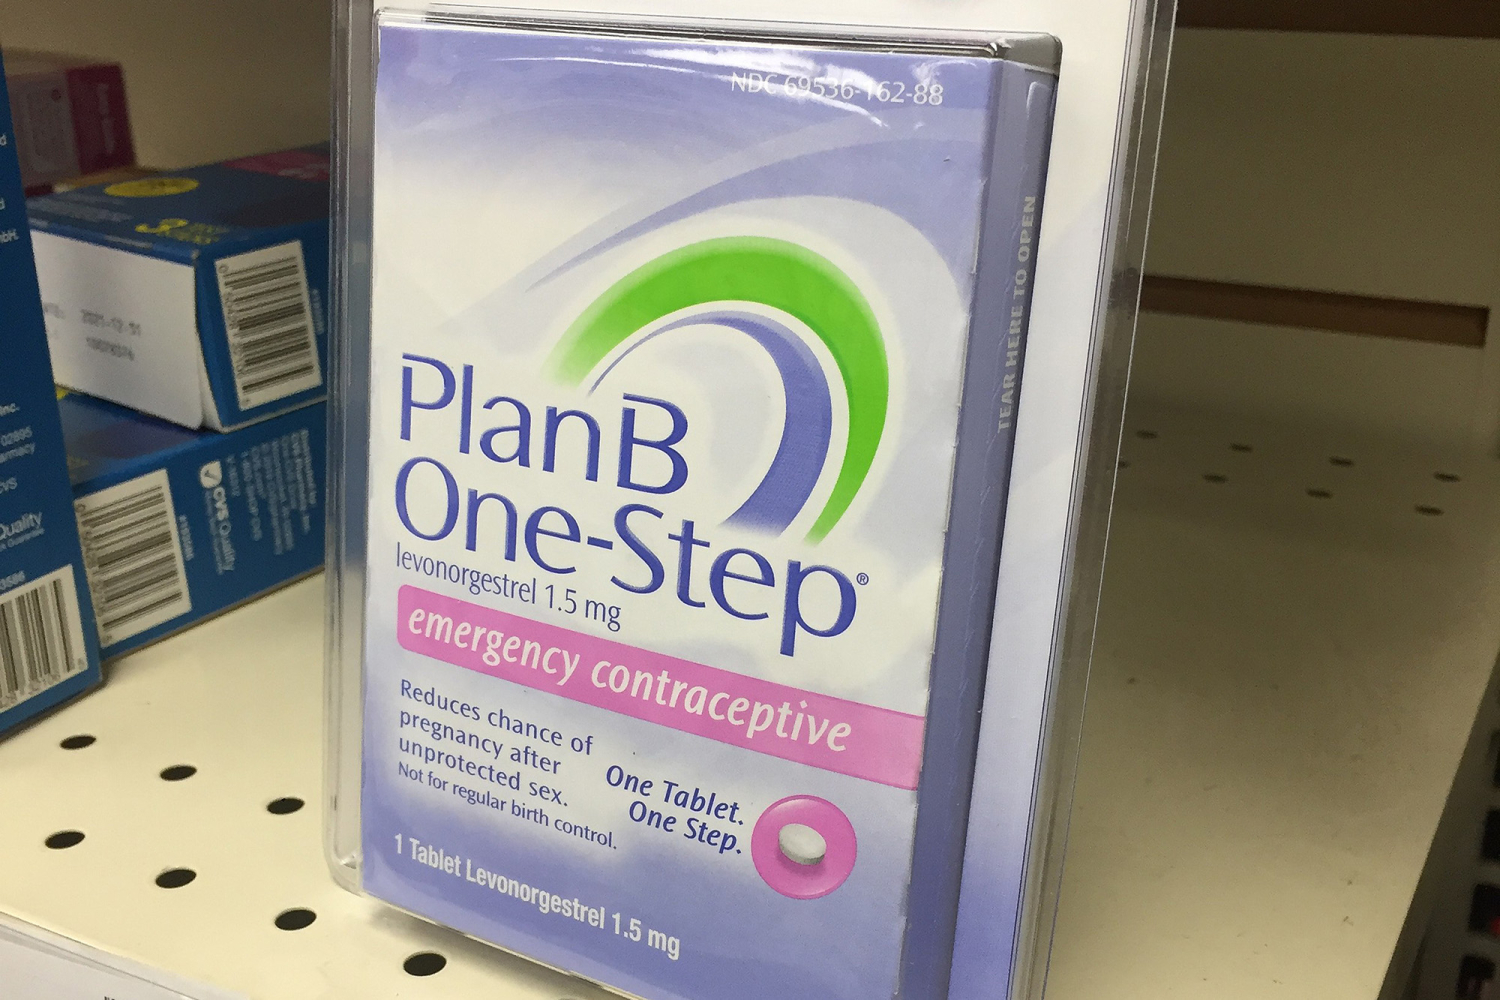 Will Indiana's abortion law affect emergency contraception like